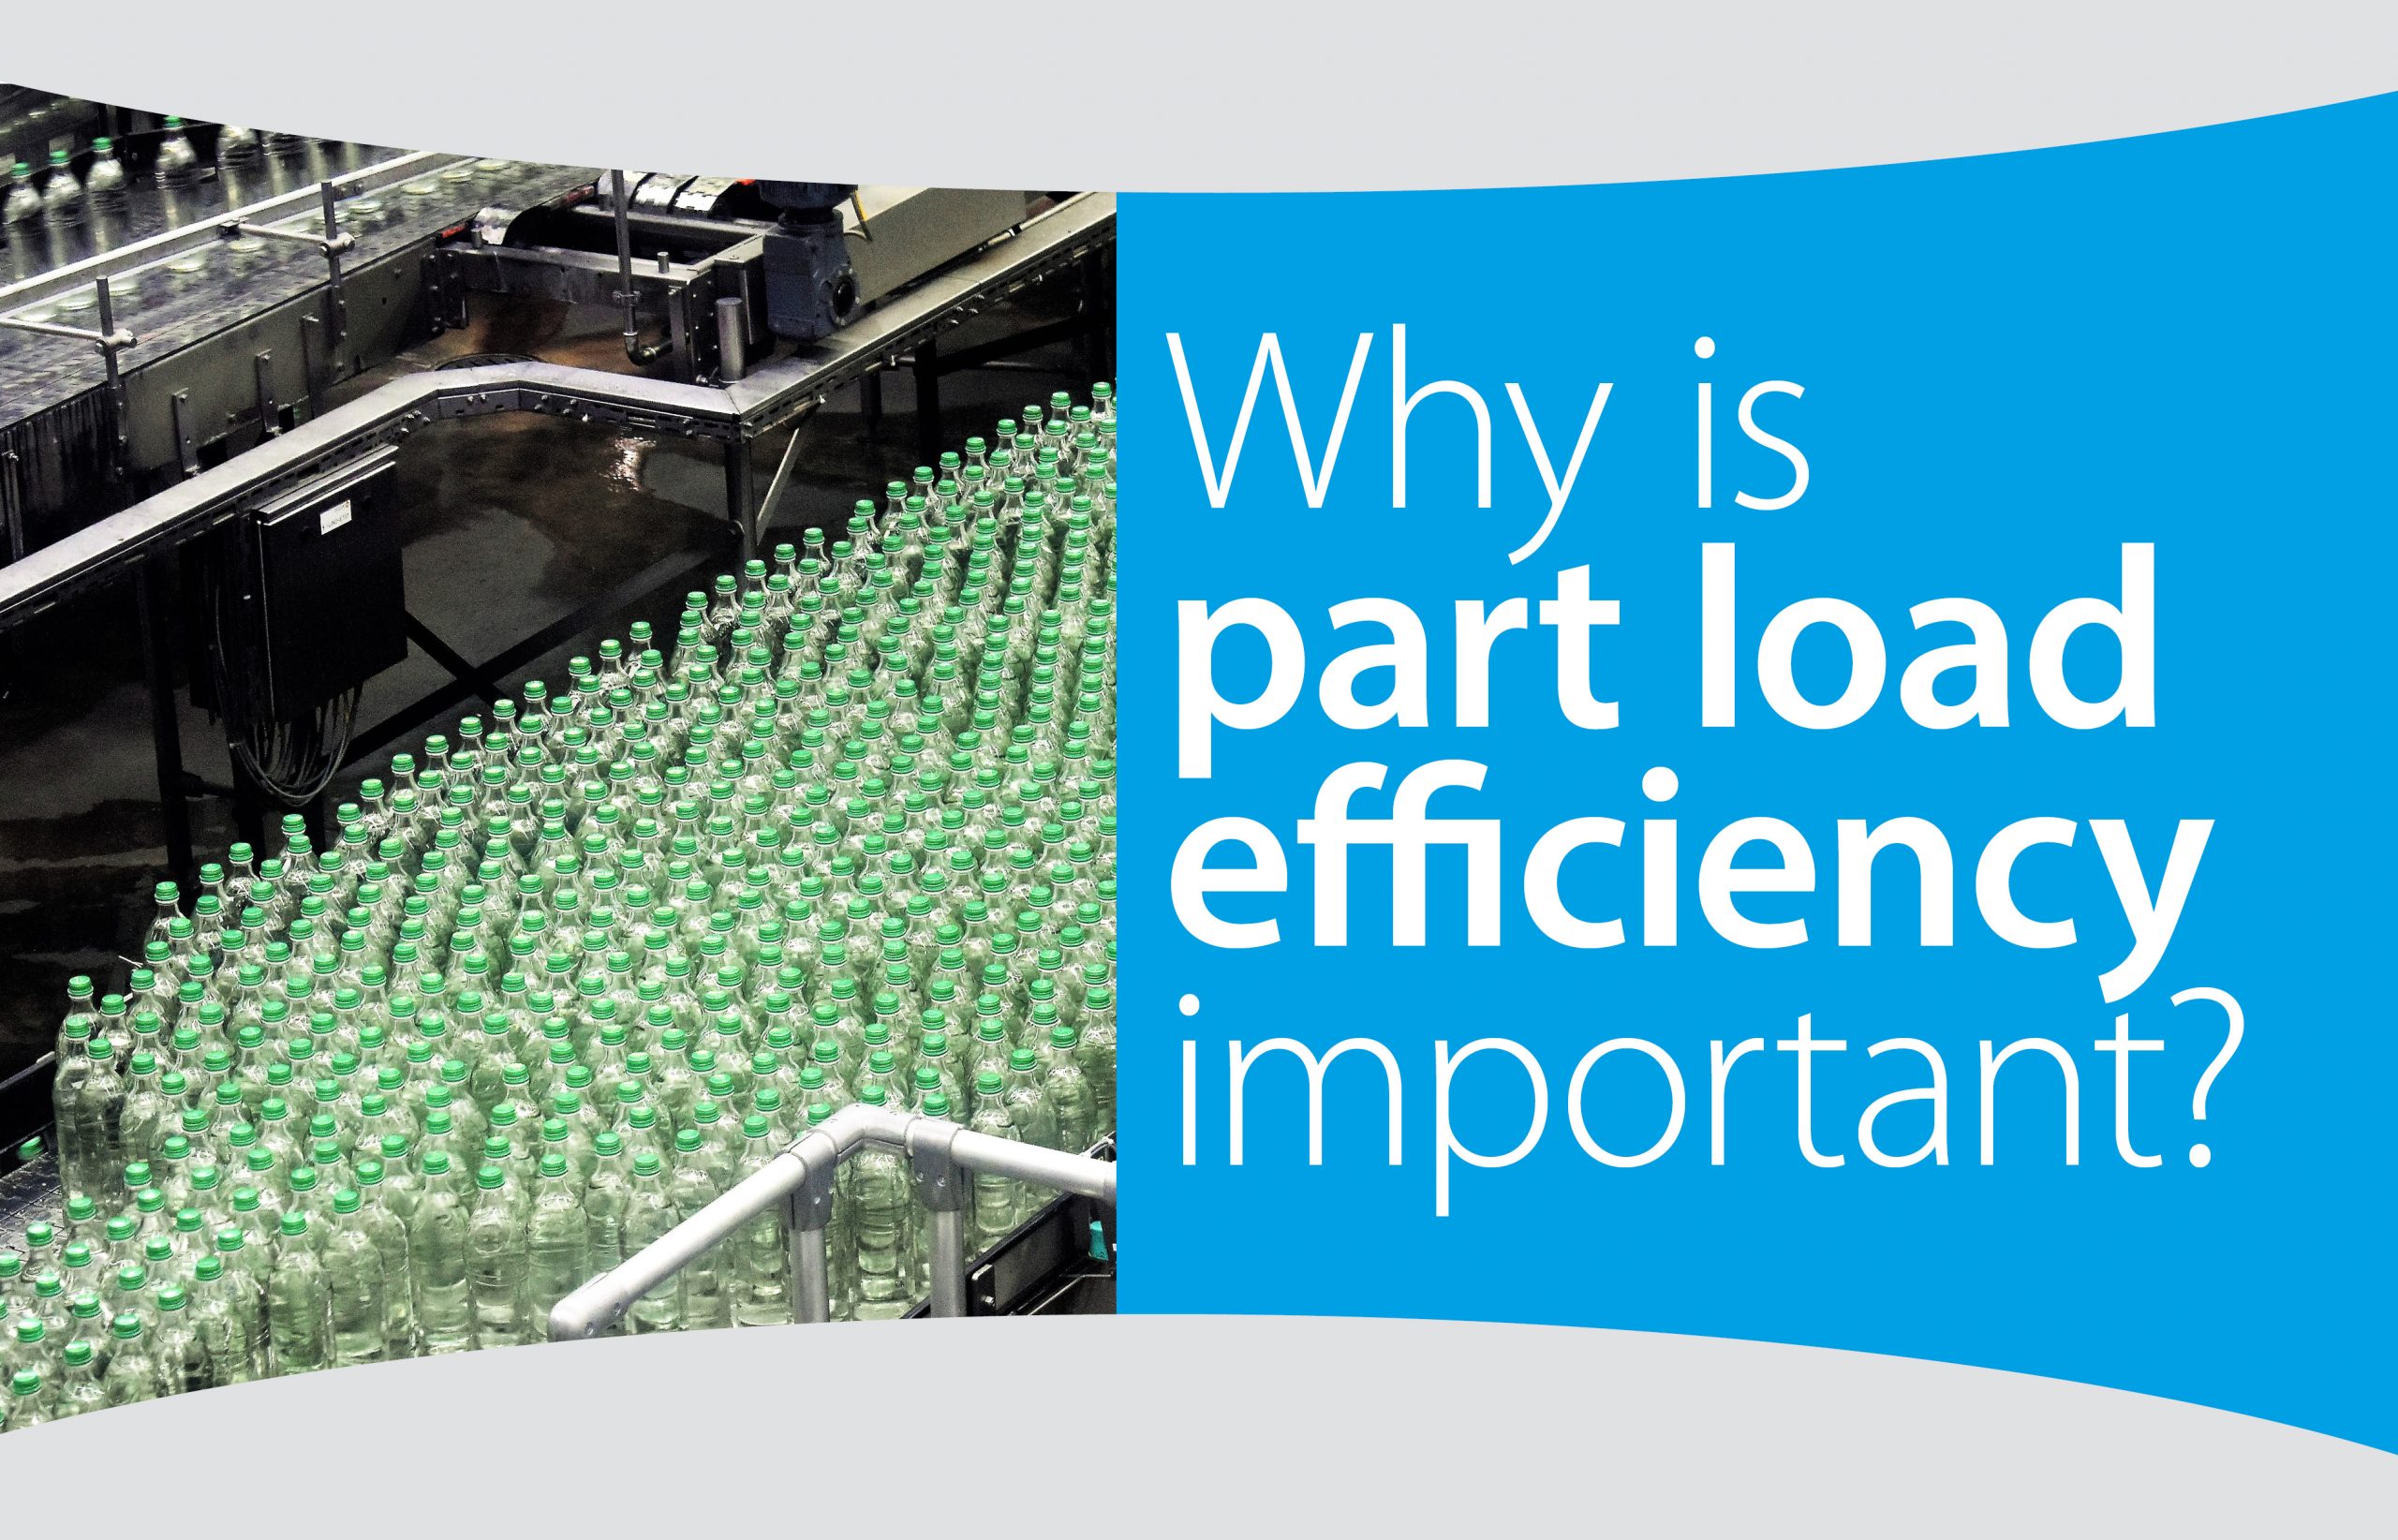 Why is part load efficiency important?